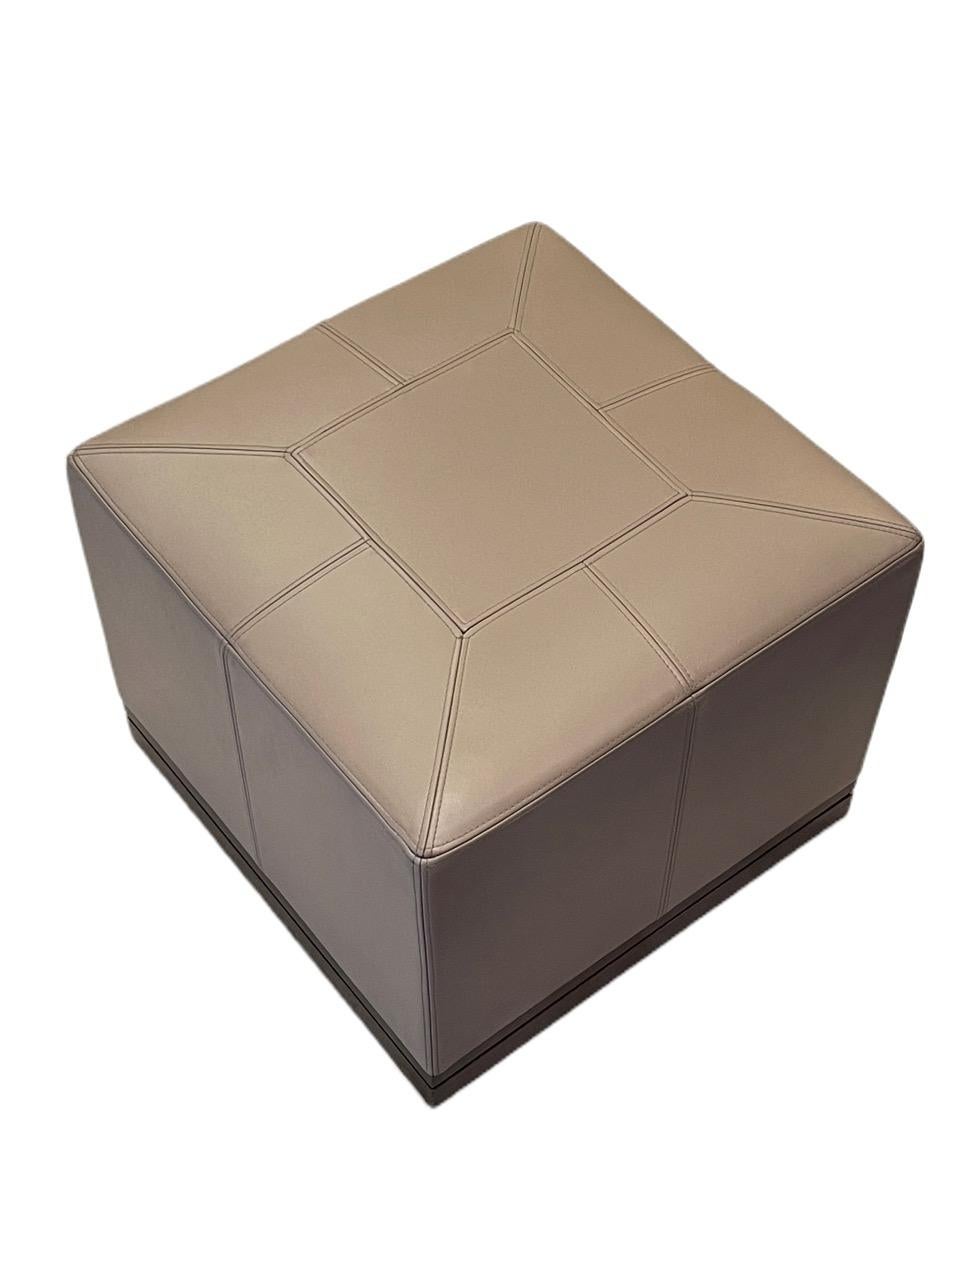 Contemporary Custom Holly Hunt Archipelago Ottoman in Taupe Color